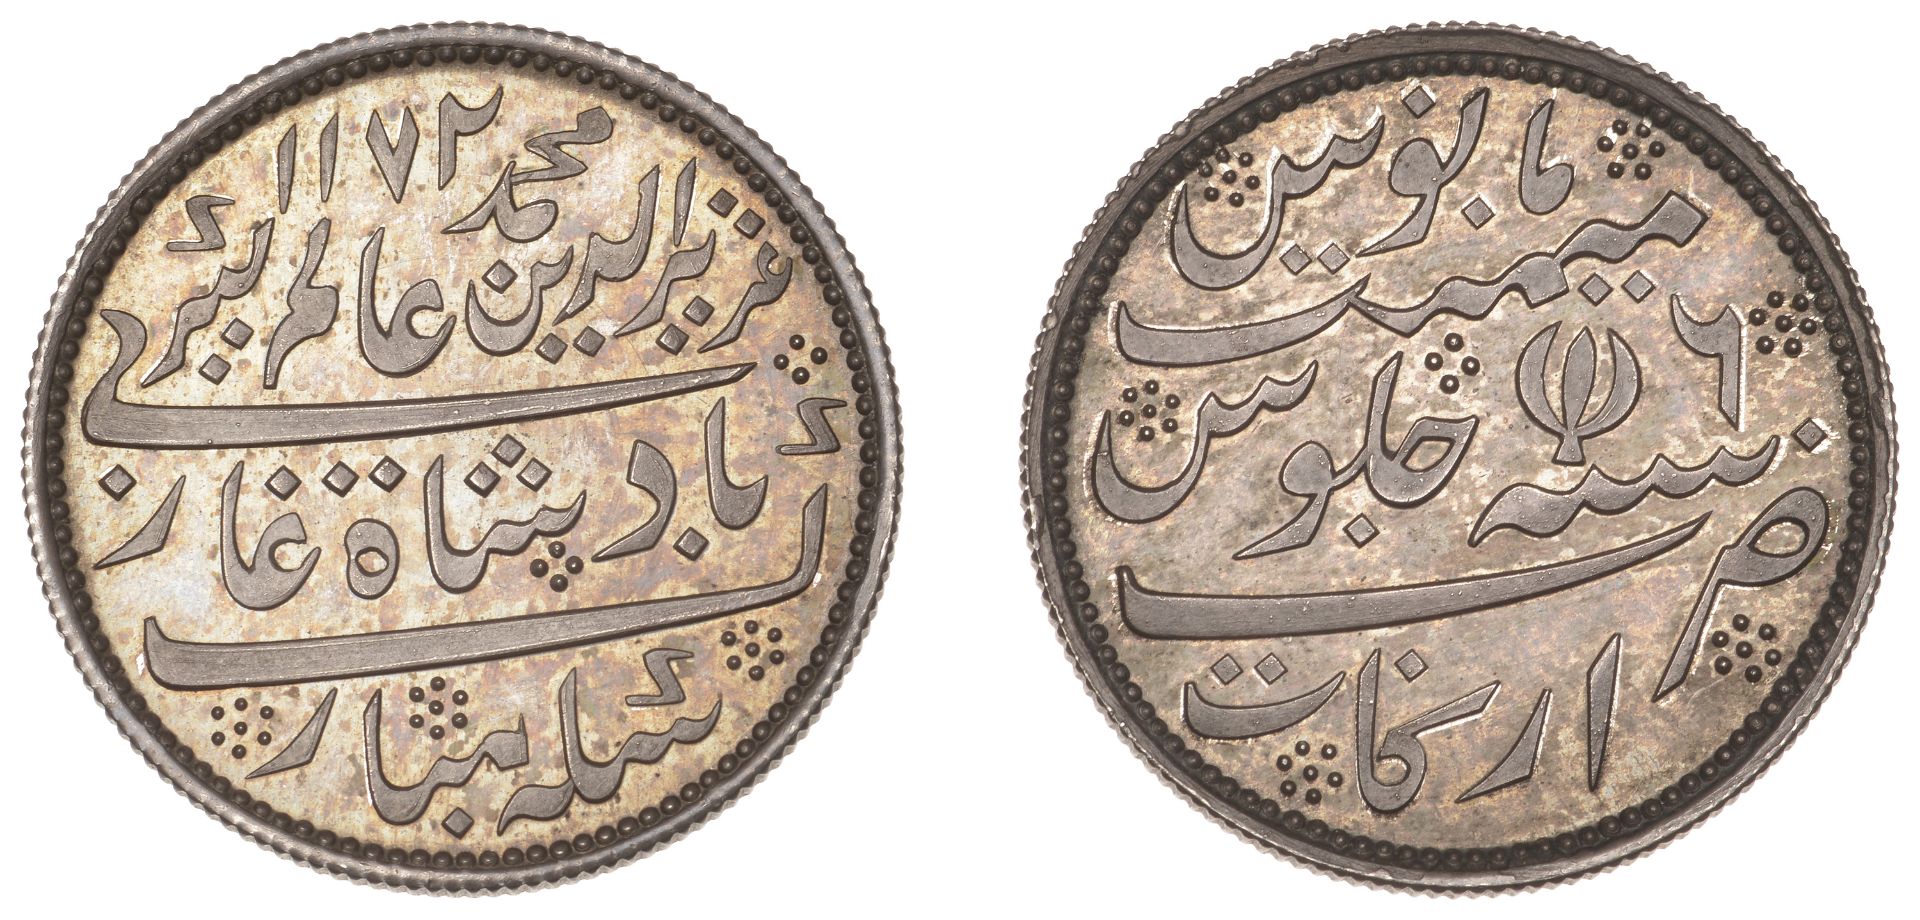 East India Company, Madras Presidency, Later coinages 1812-35, Madras minting, silver Patter...